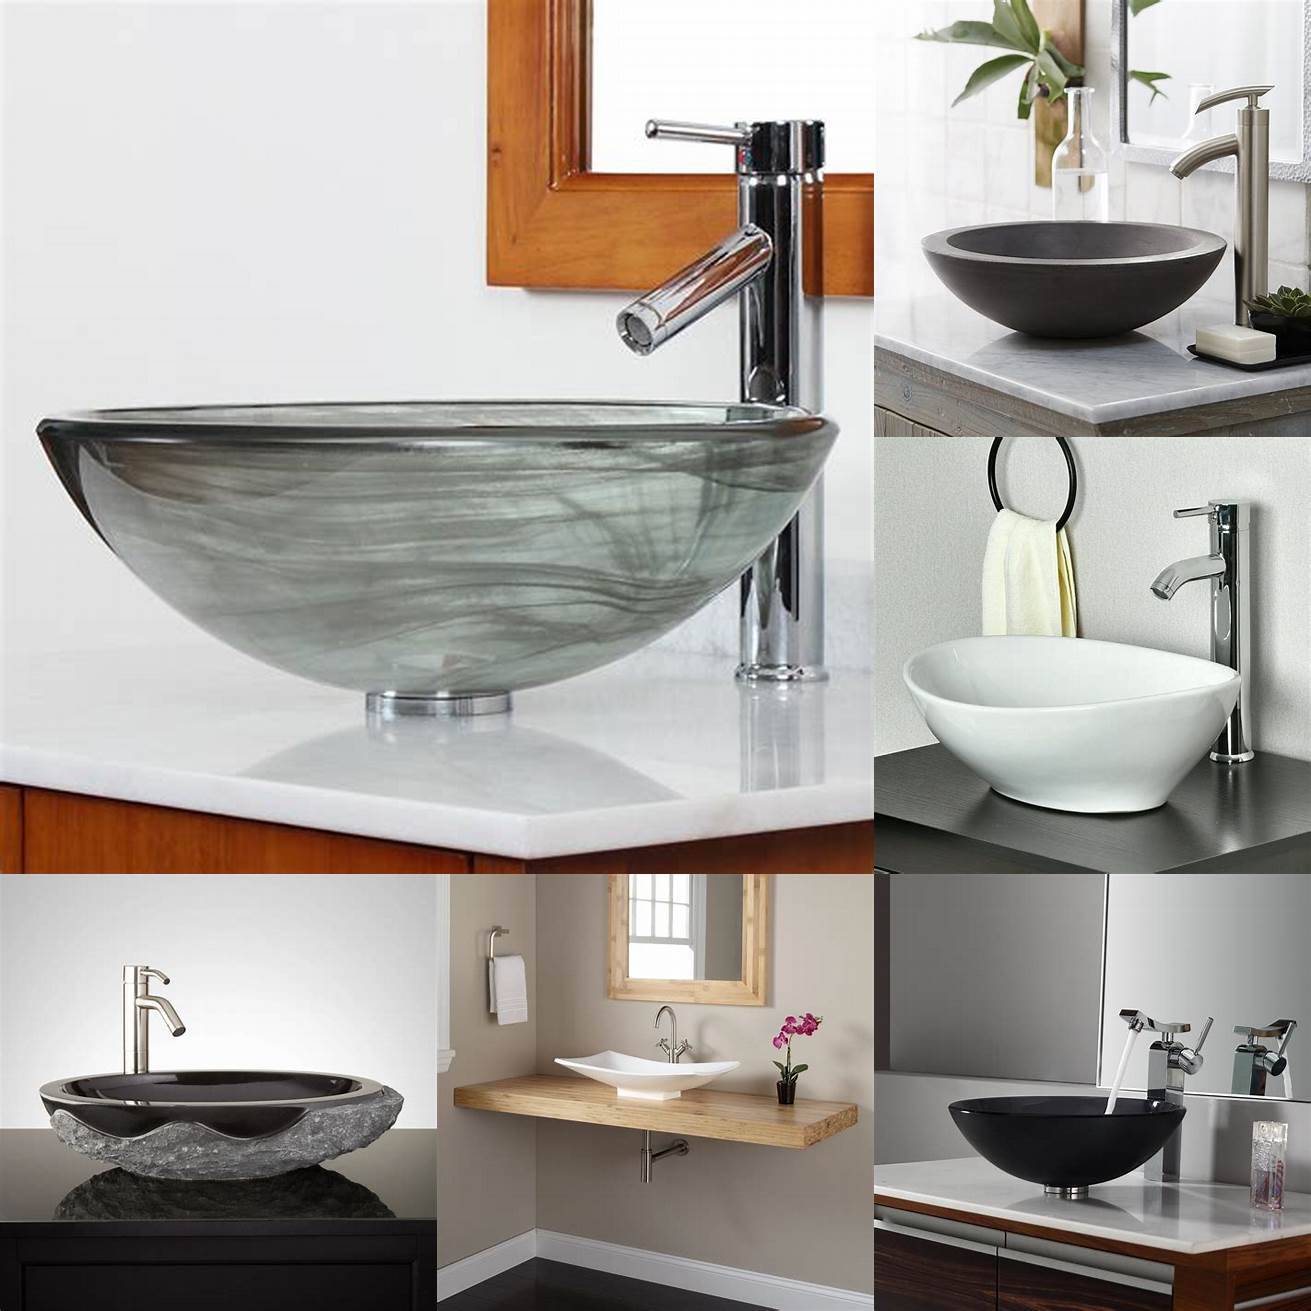 Vessel sinks sit on top of the countertop giving your bathroom a modern and chic look They come in different shapes and sizes and can be made of different materials such as glass ceramic and stone However they require a higher countertop and can be more expensive than other types of sinks